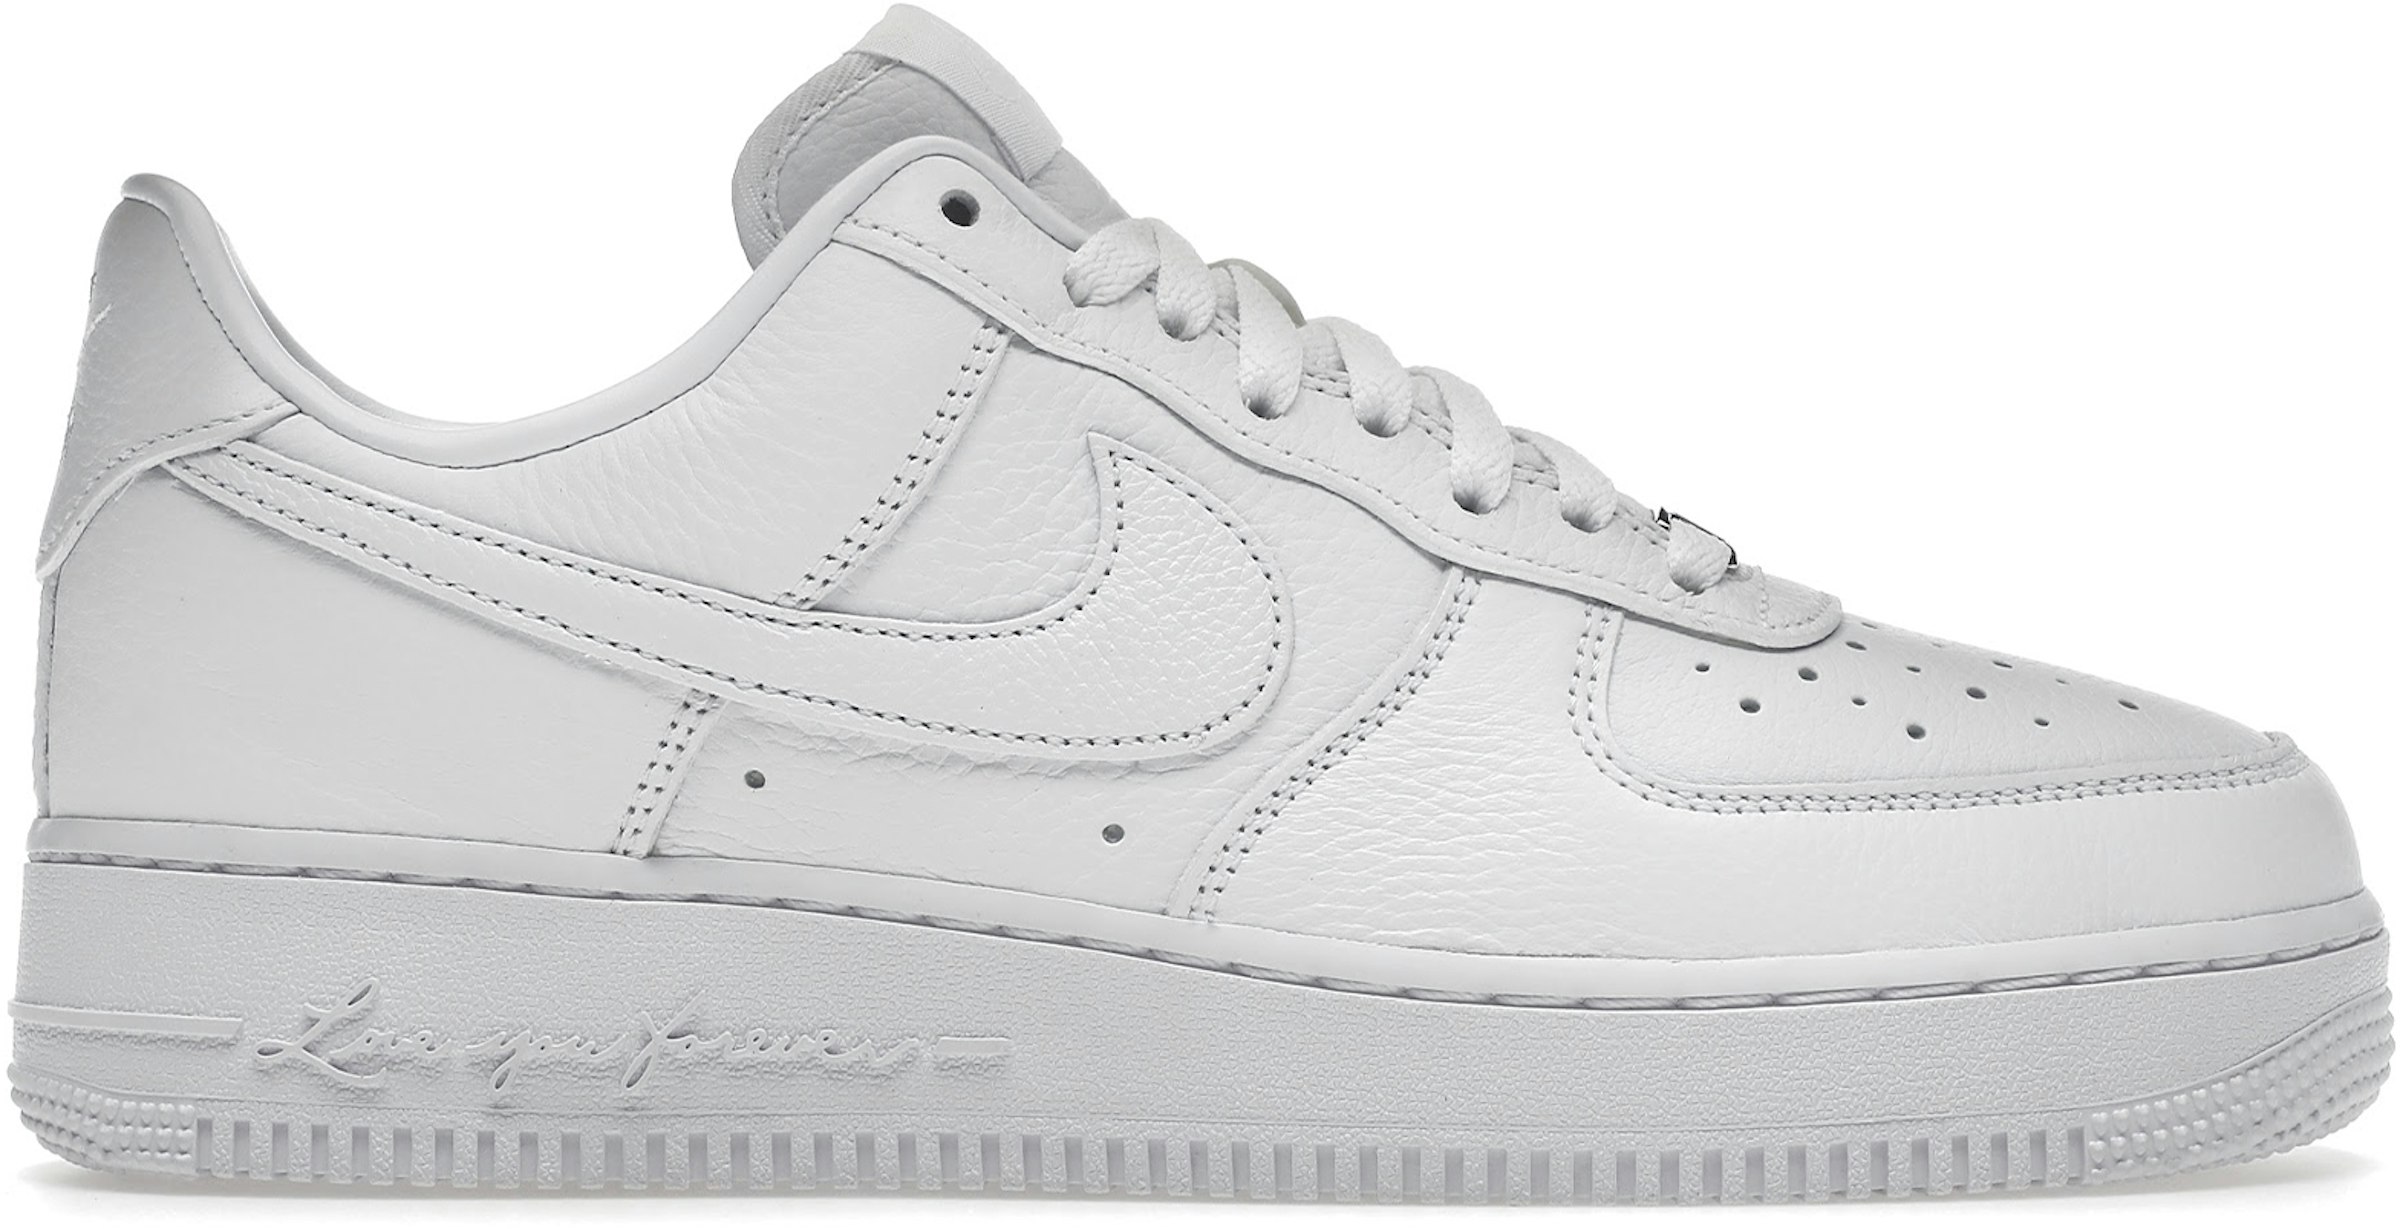 apetito intervalo problema Nike Air Force 1 Low Drake NOCTA Certified Lover Boy Men's - CZ8065-100 - US